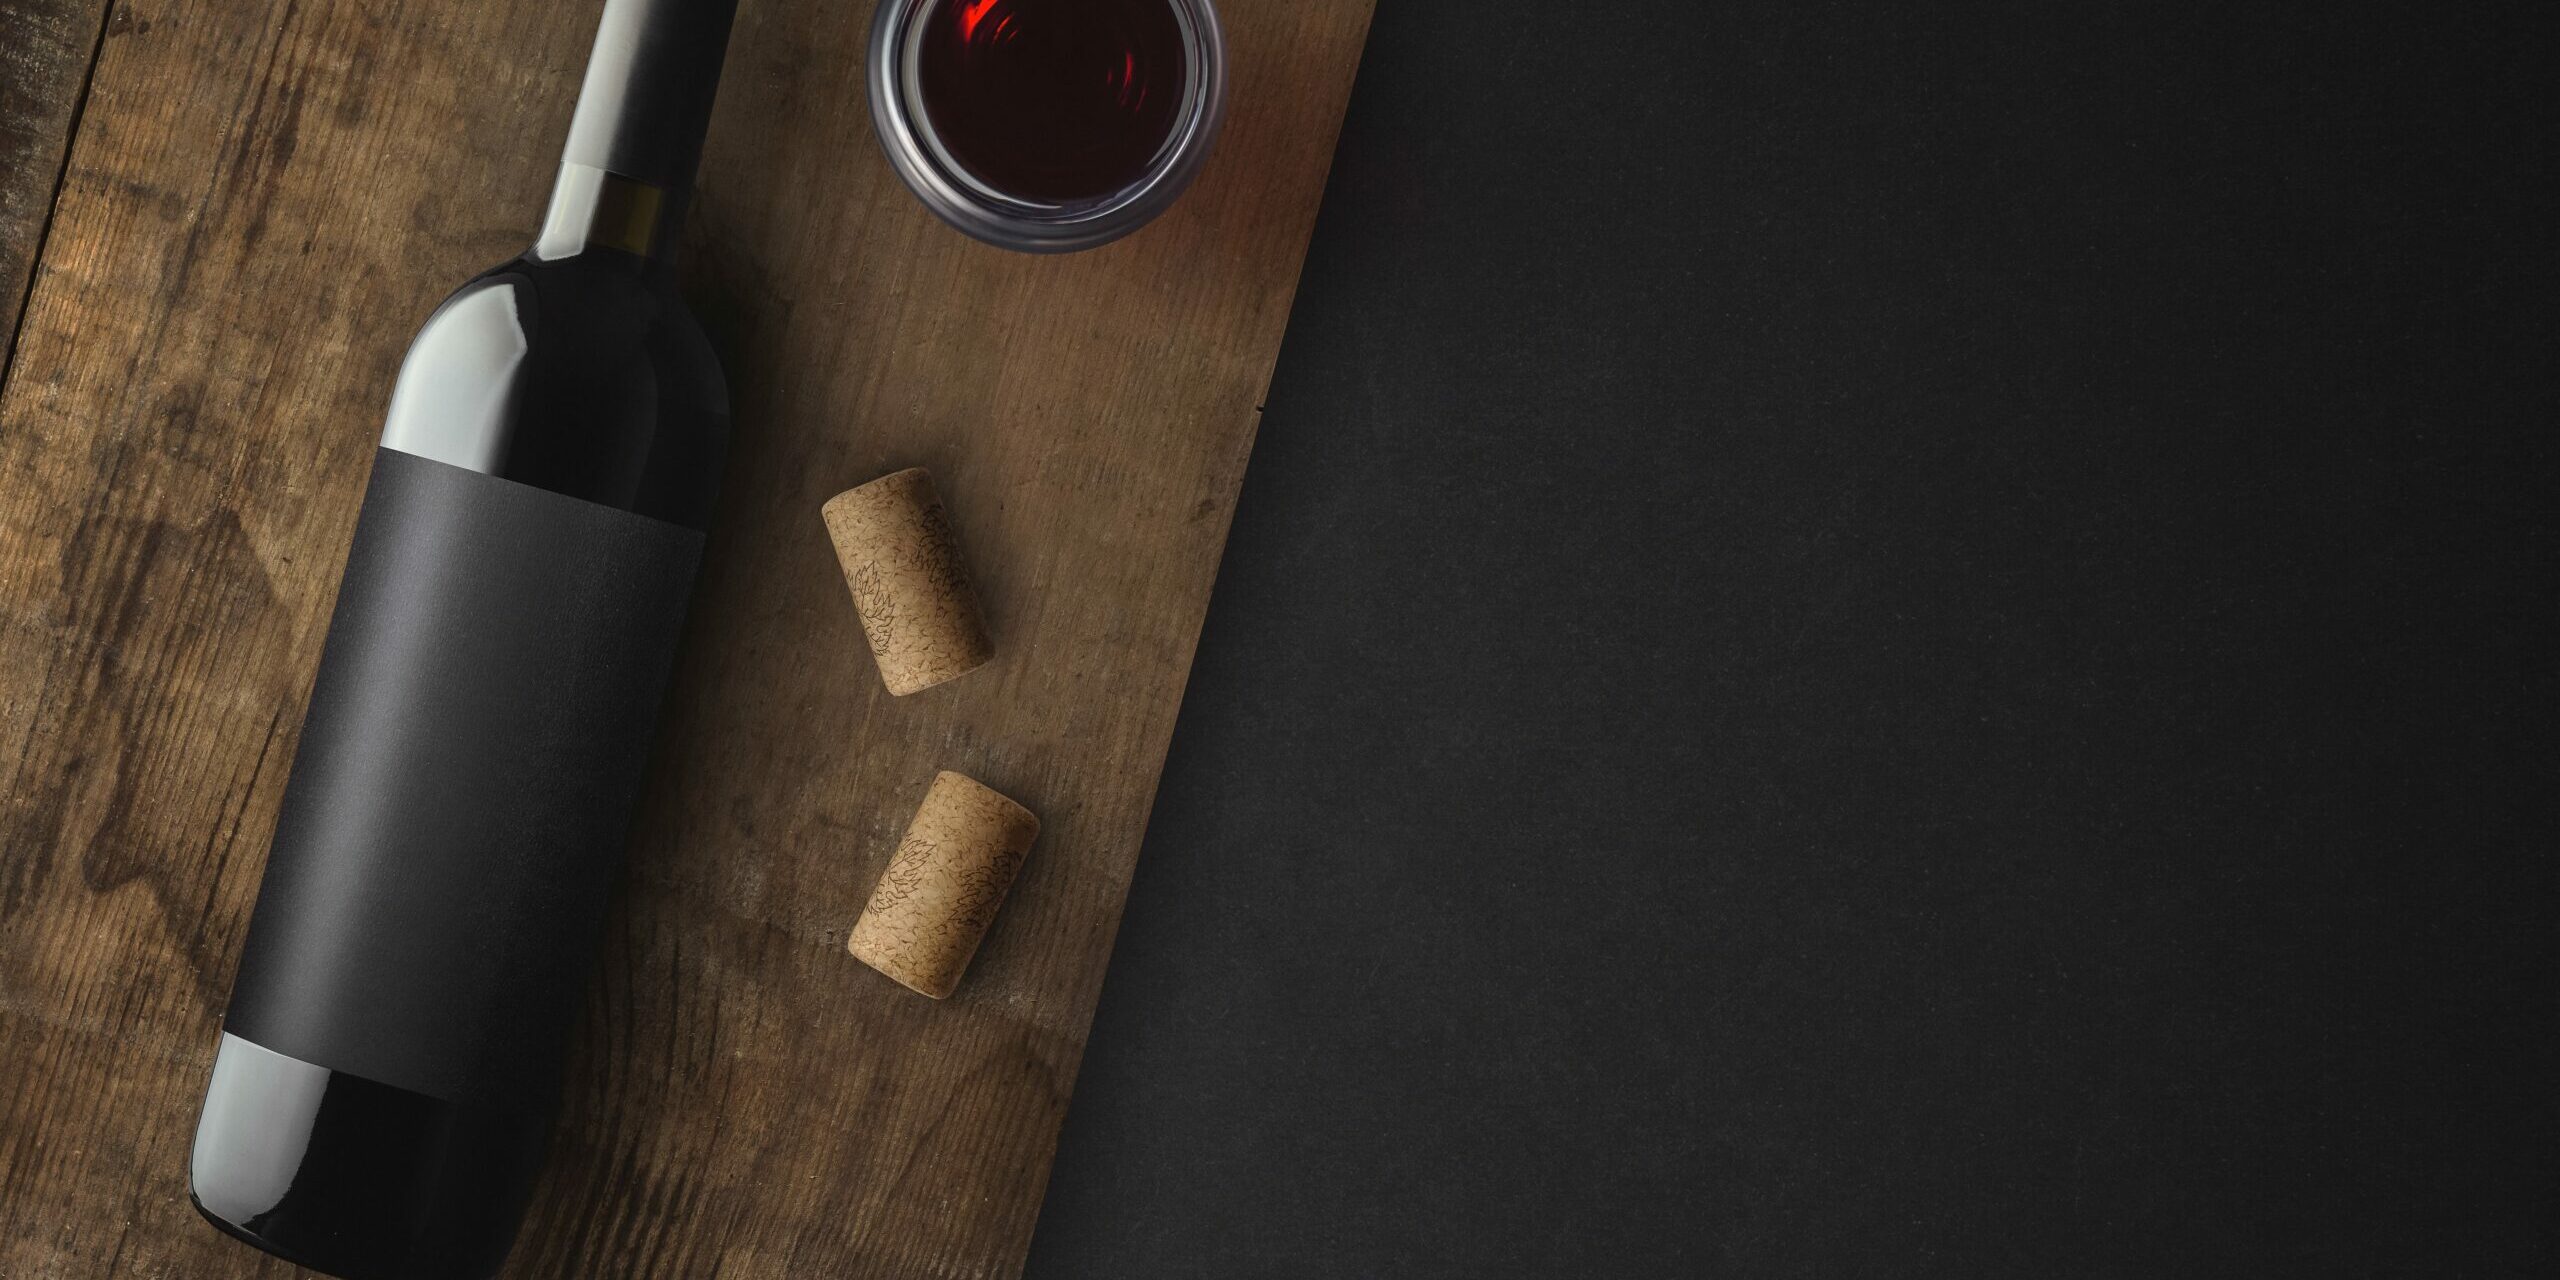 content marketing for wine suppliers